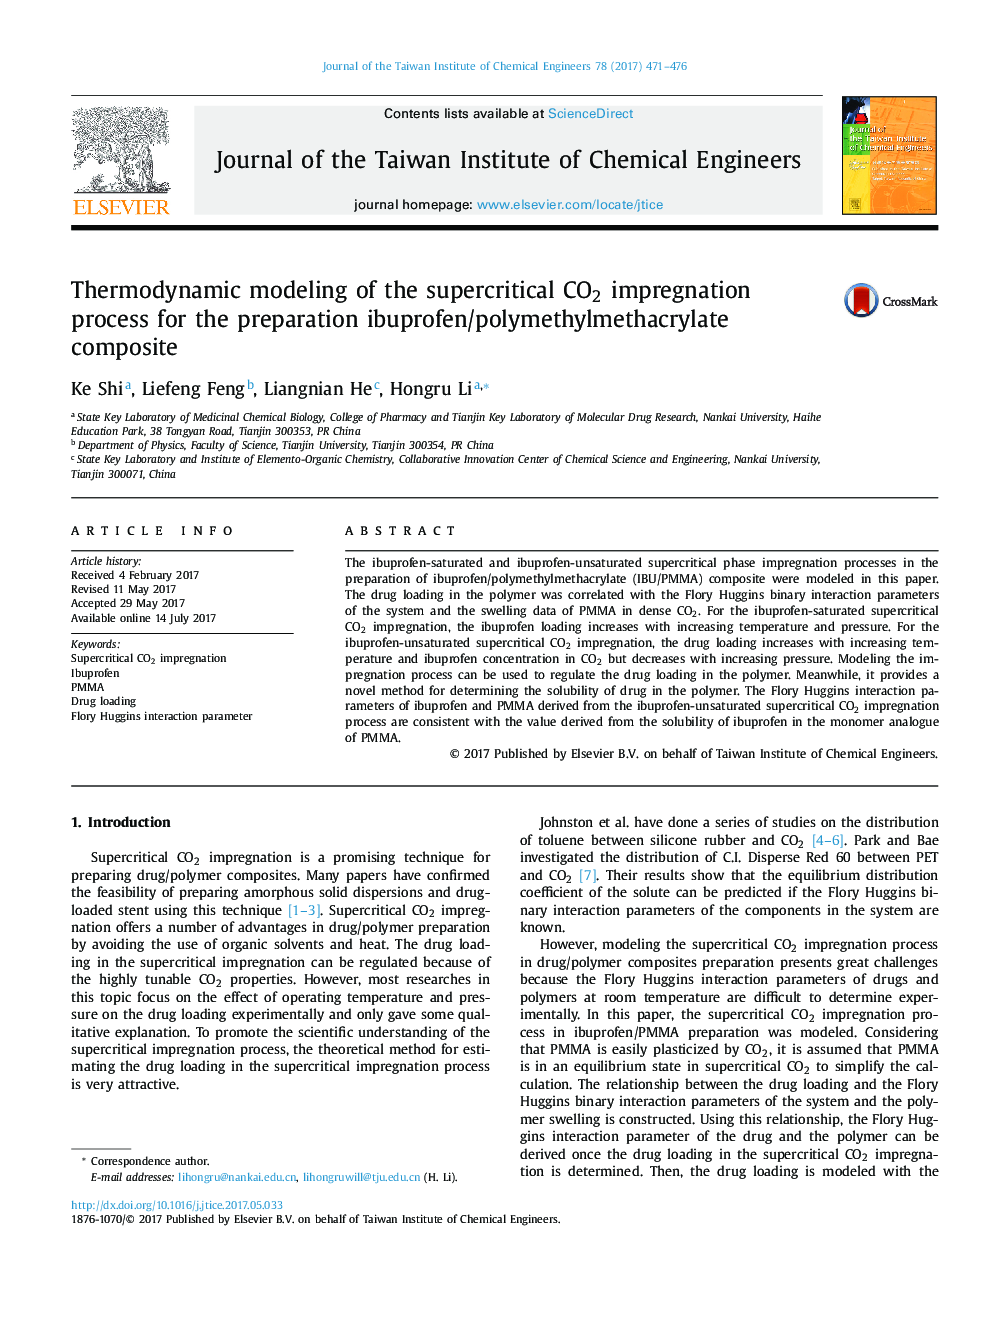 Thermodynamic modeling of the supercritical CO2 impregnation process for the preparation ibuprofen/polymethylmethacrylate composite